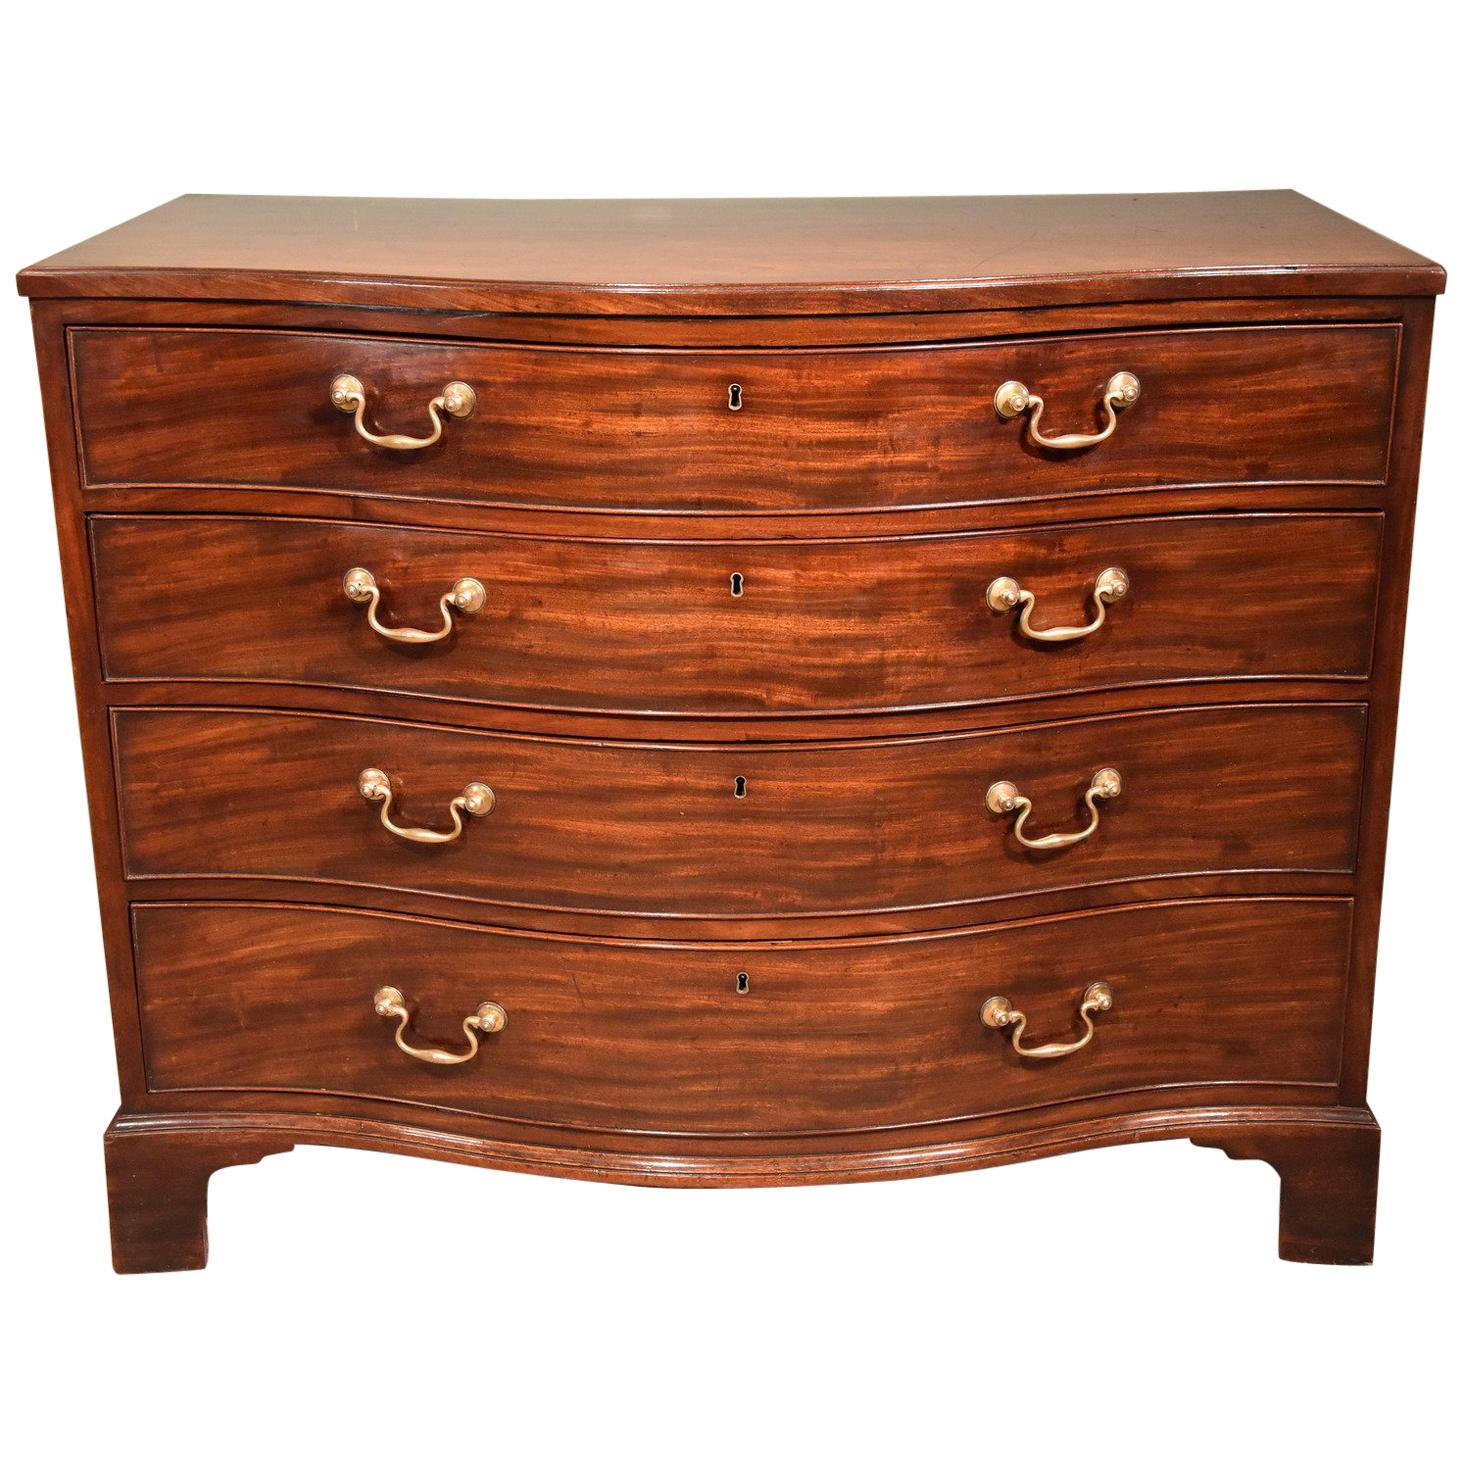 George III Serpentine Fronted Mahogany Chest of Drawers For Sale